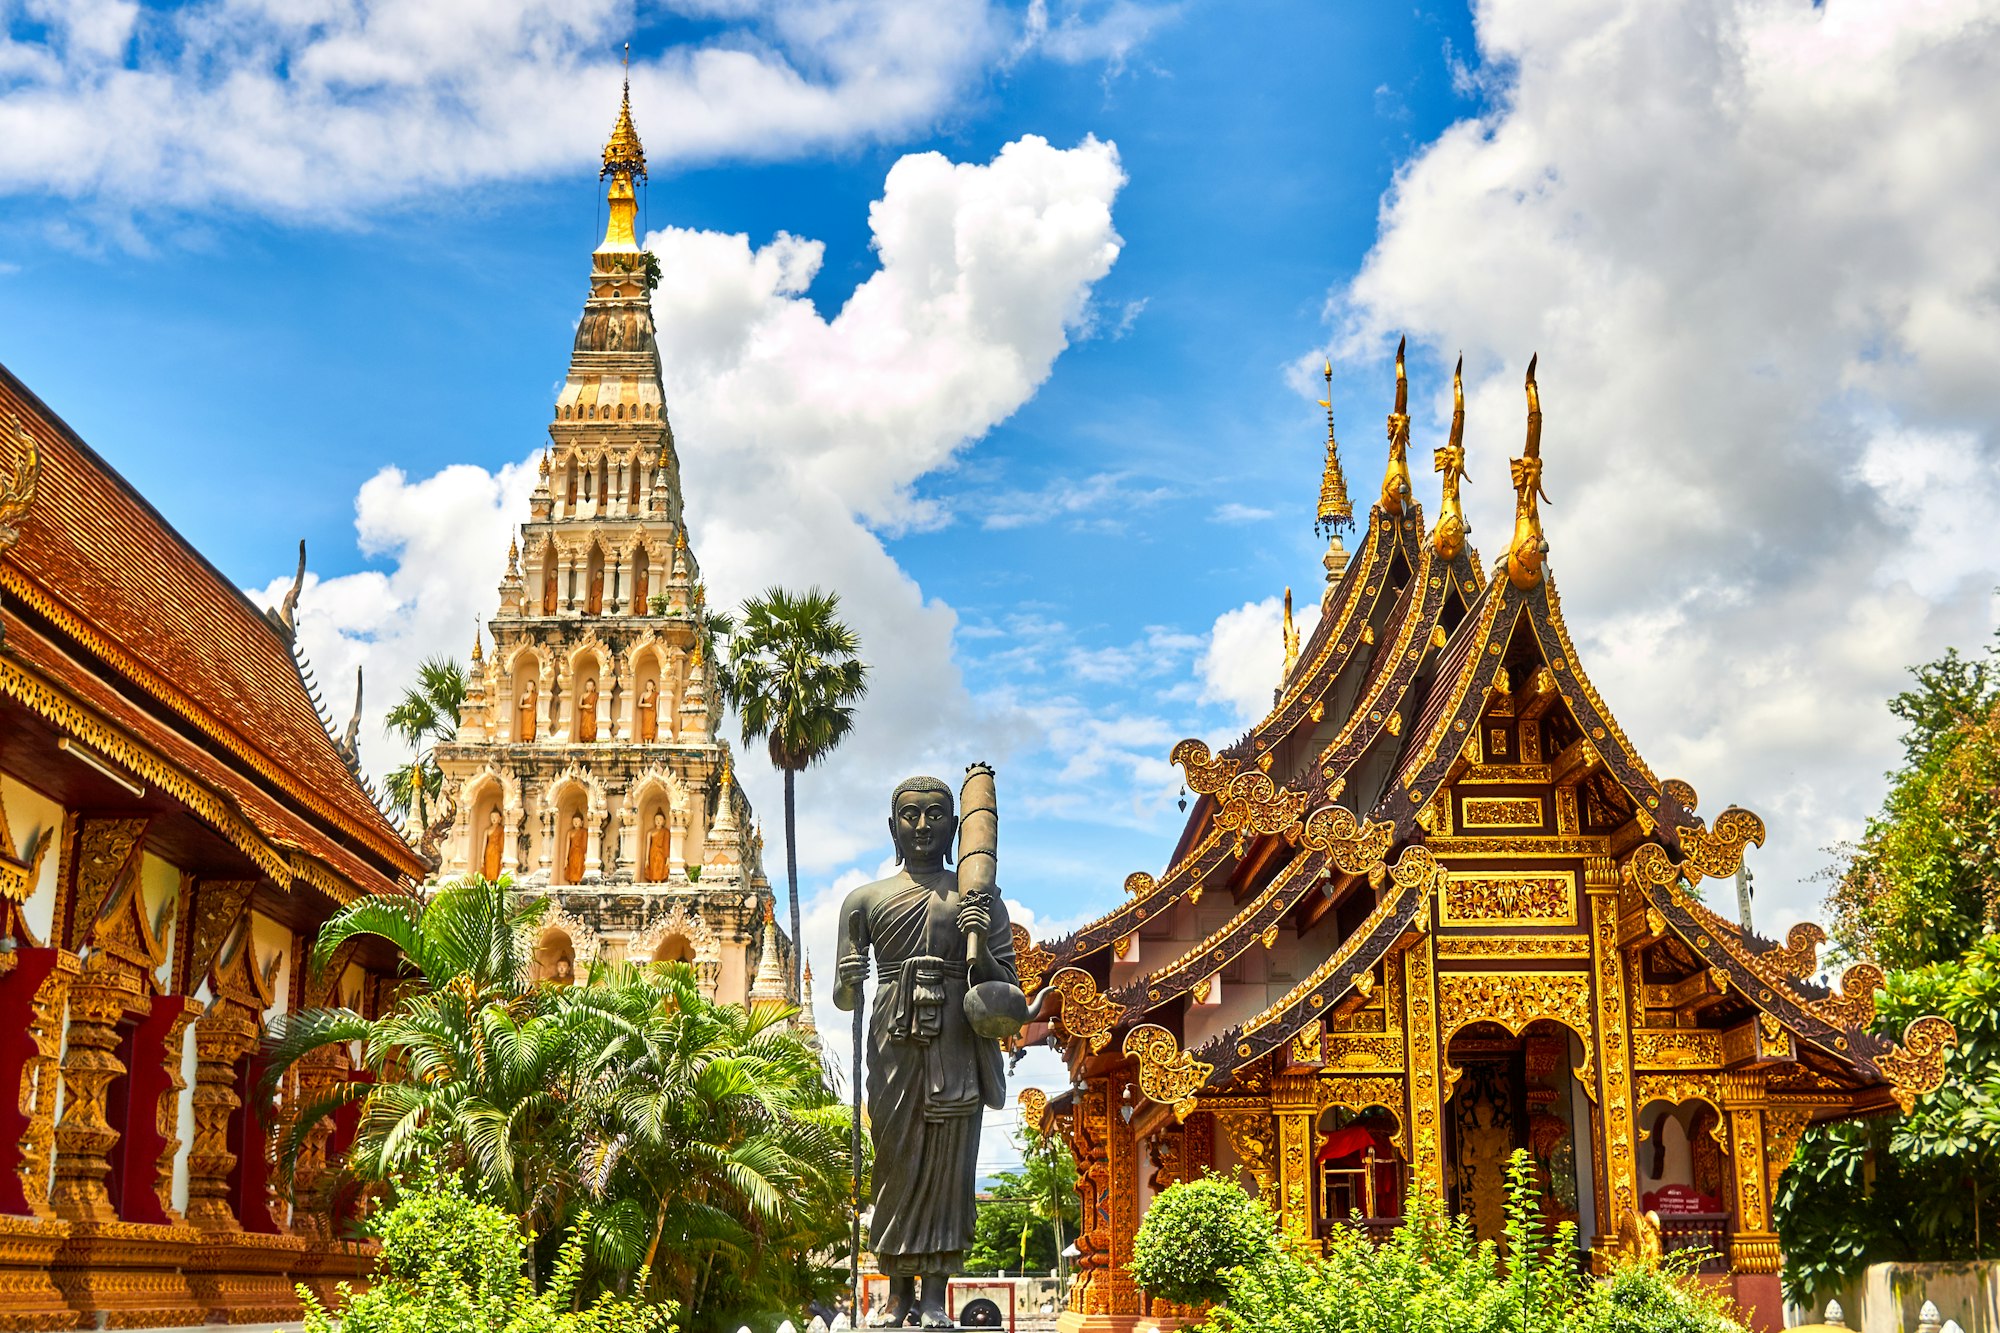 Traveling on motorbike in norther thailand we came across these amazing sculptural temples and buildings.